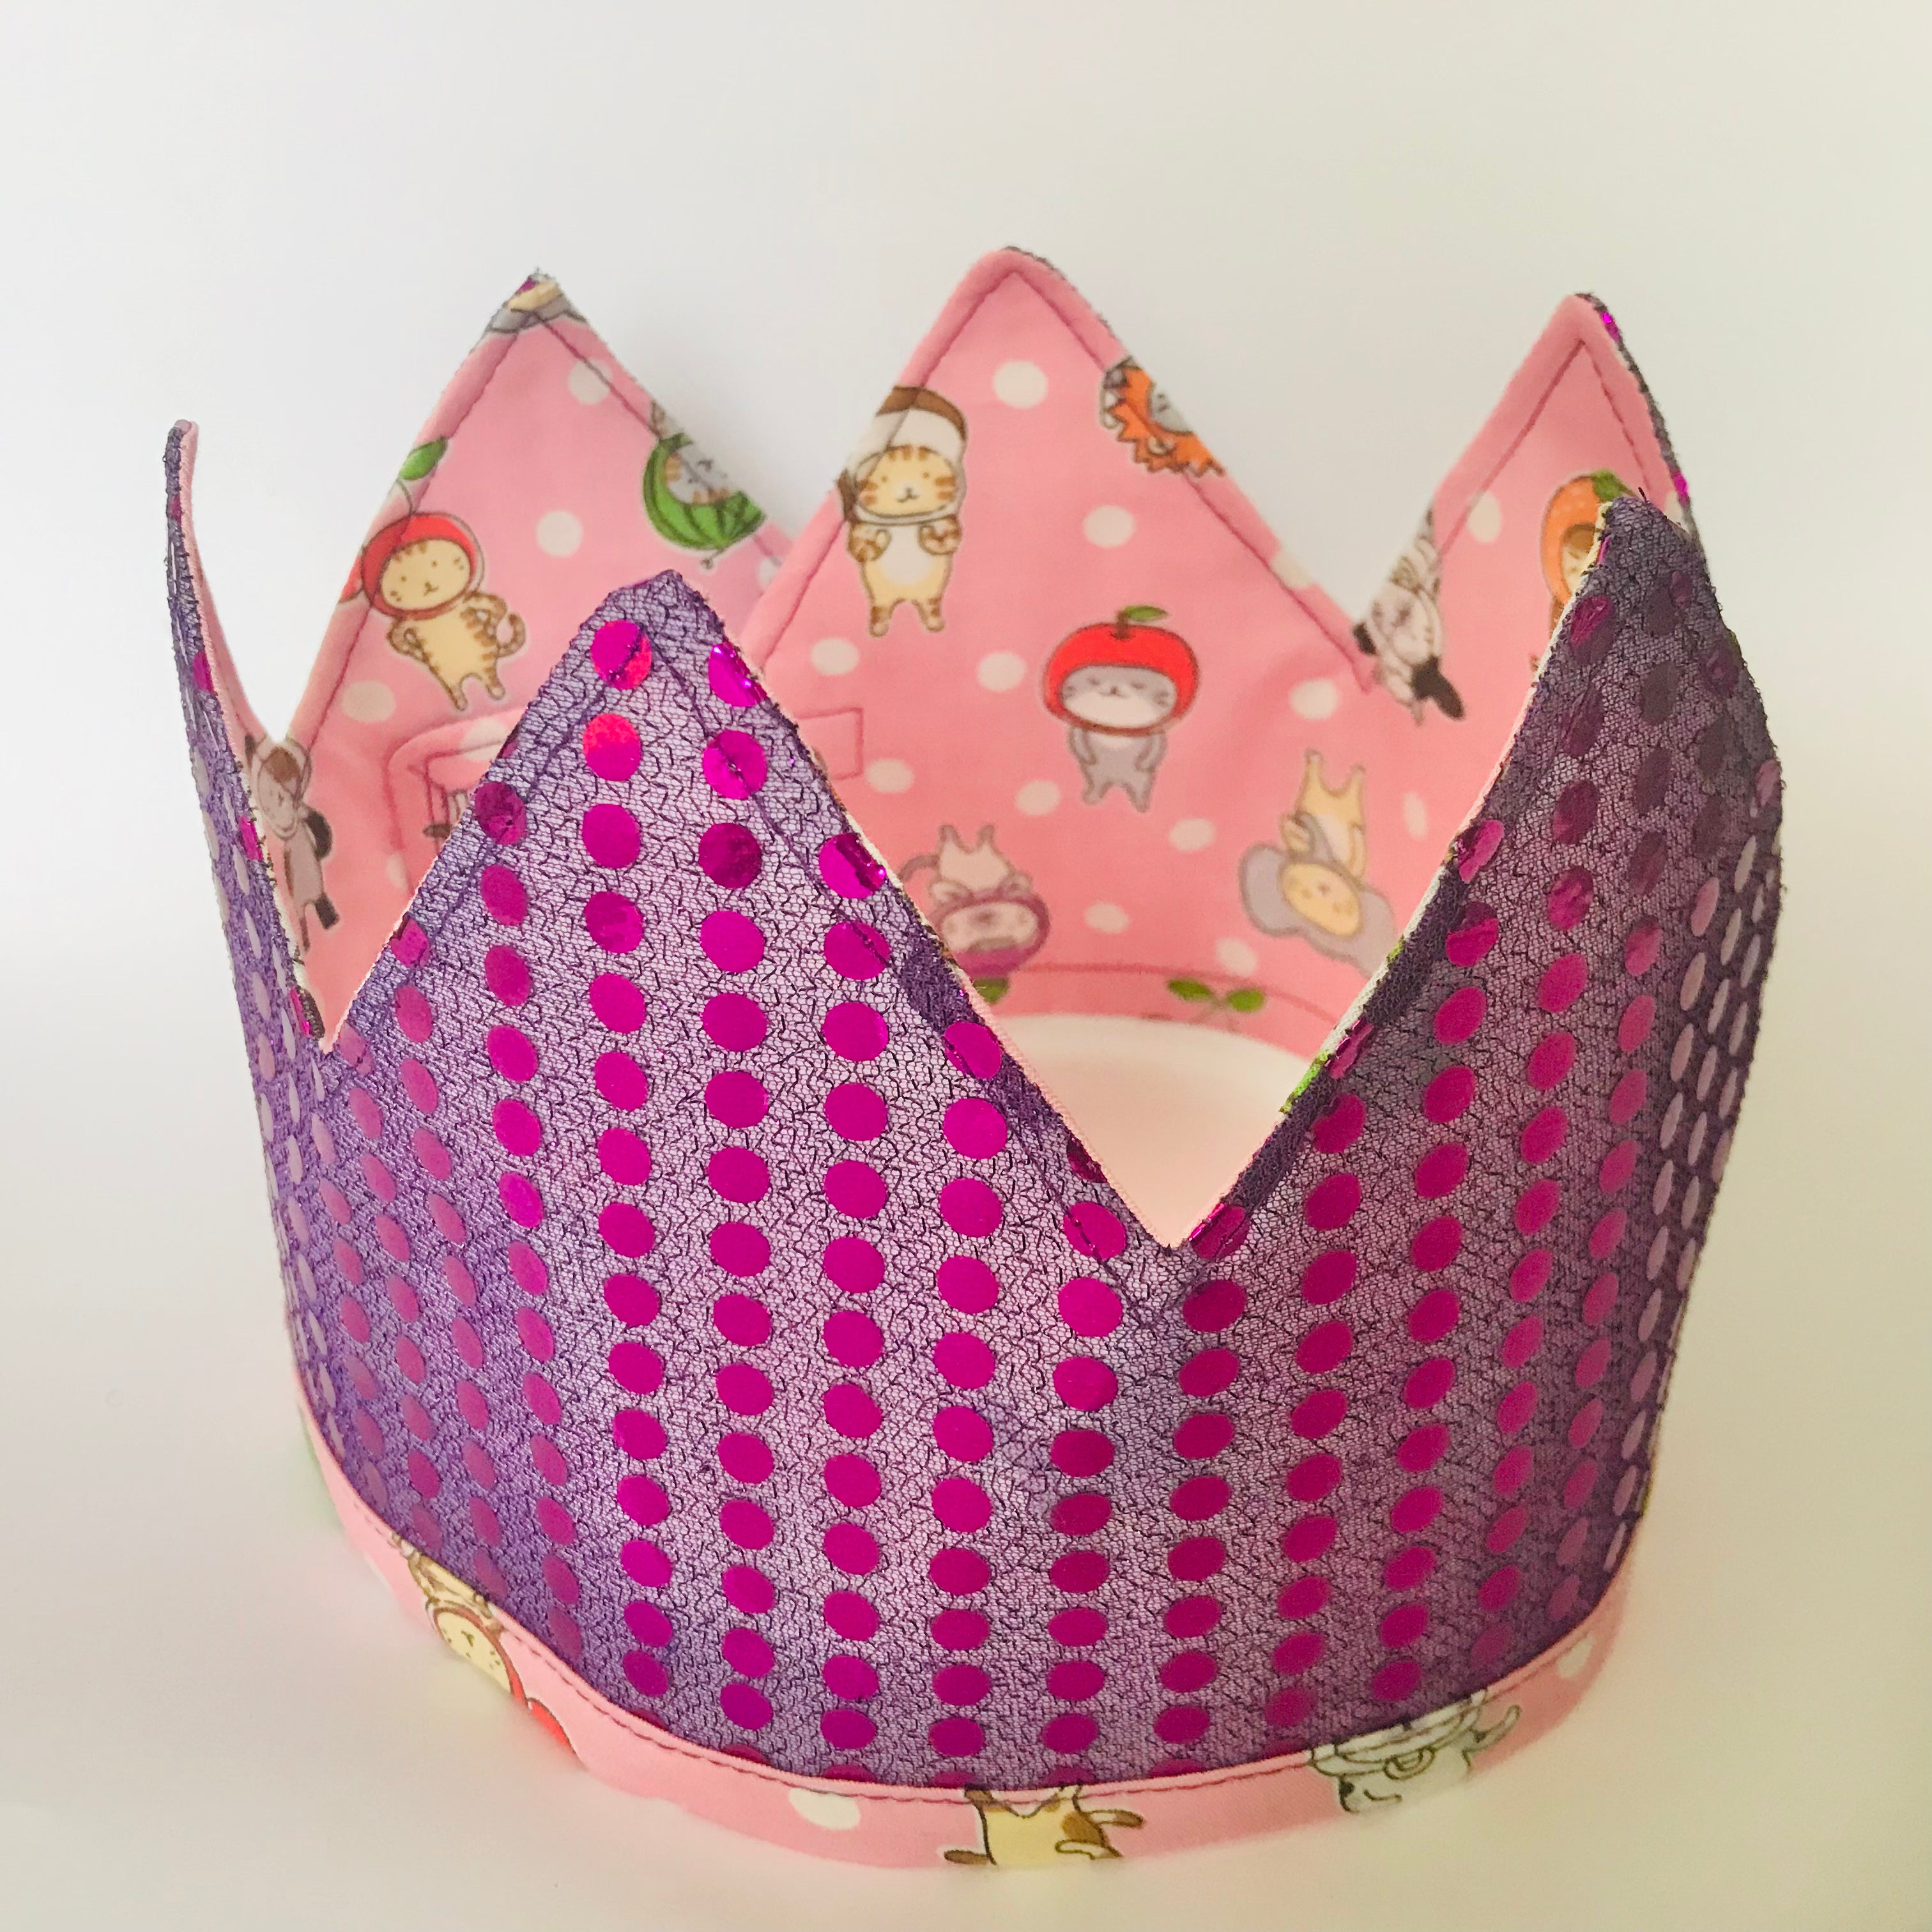 Dress Up Fabric Crowns - reversible & adjustable